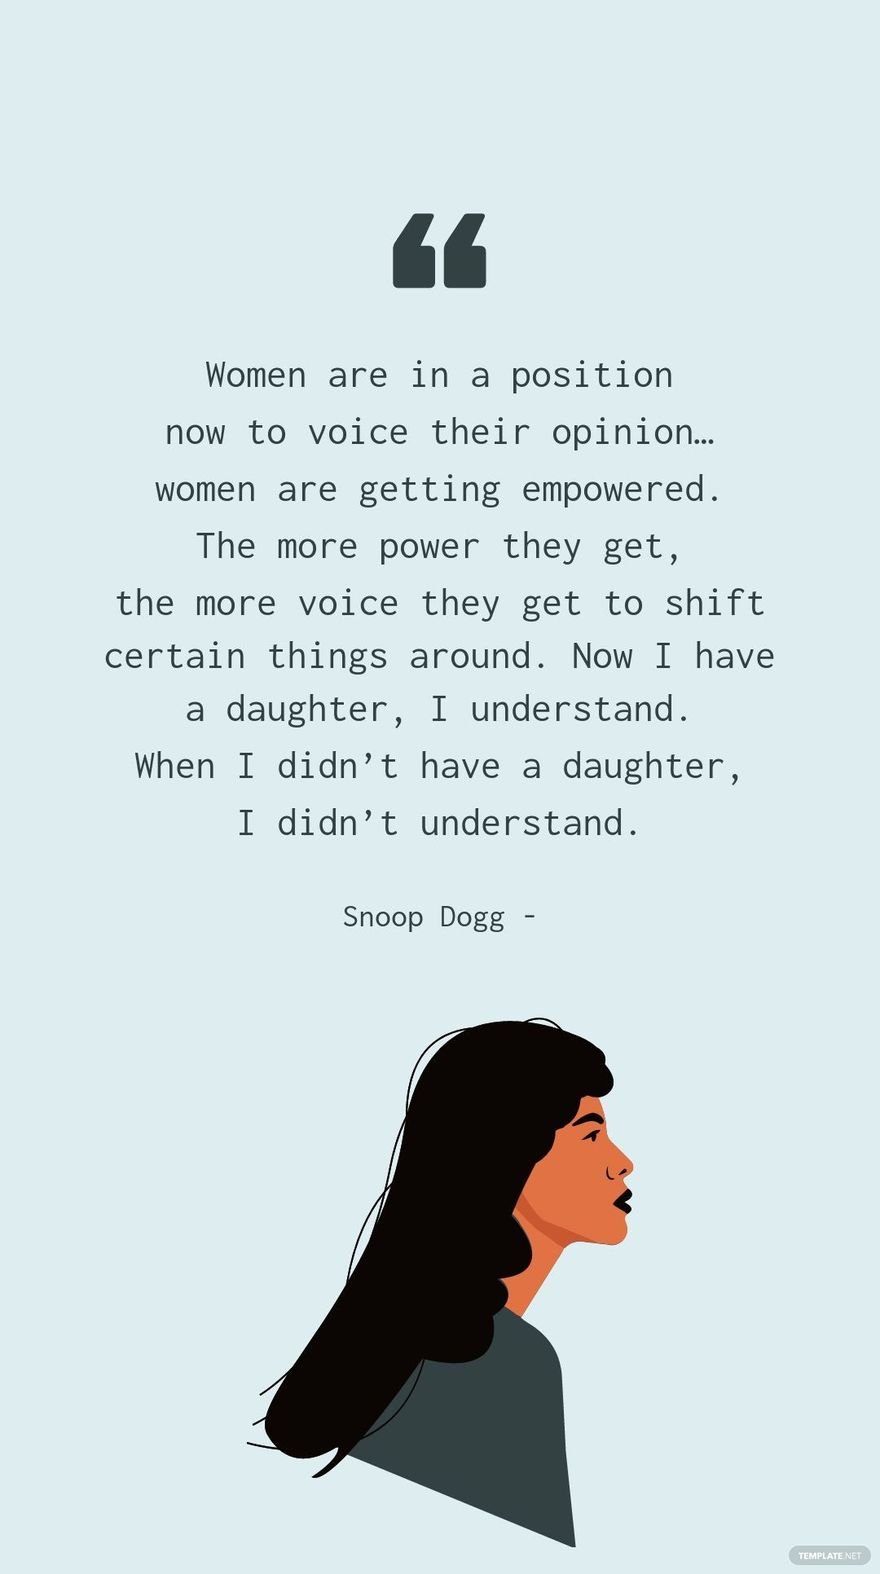 SNOOP DOGG - Women are in a position now to voice their opinion… women are getting empowered. The more power they get, the more voice they get to shift certain things around. Now I have a daughter, I 